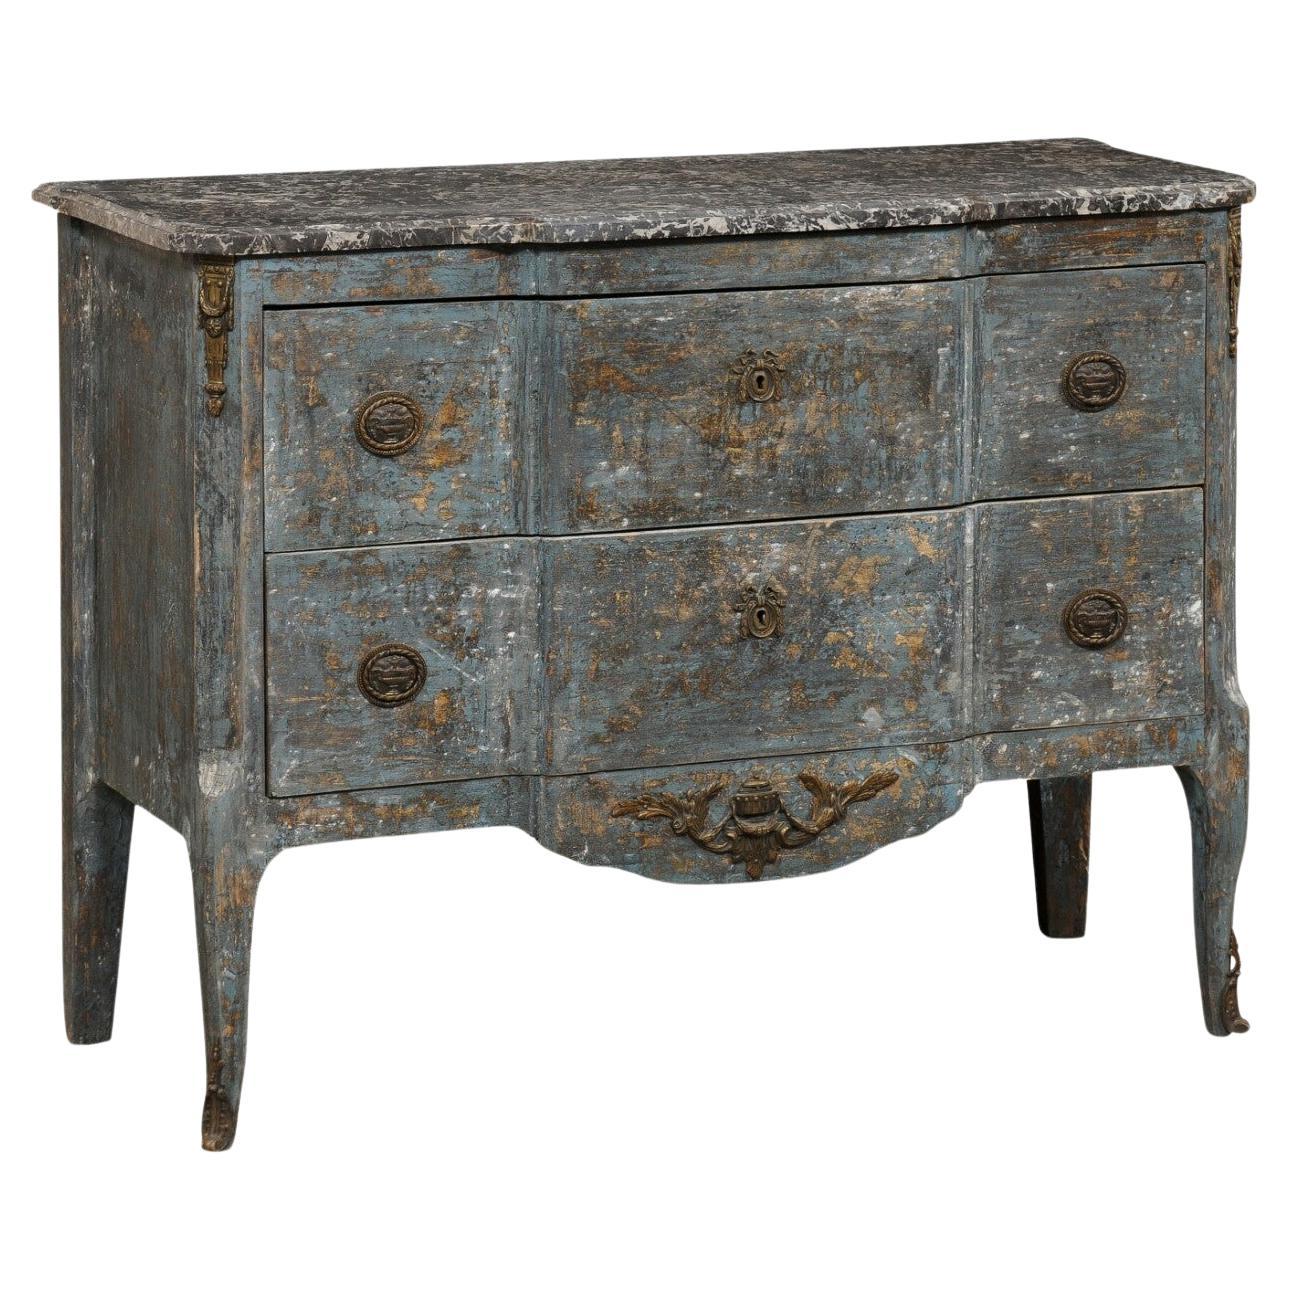 Antique French Neoclassical Style Commode w/Black Marble Top & Scraped Finish For Sale